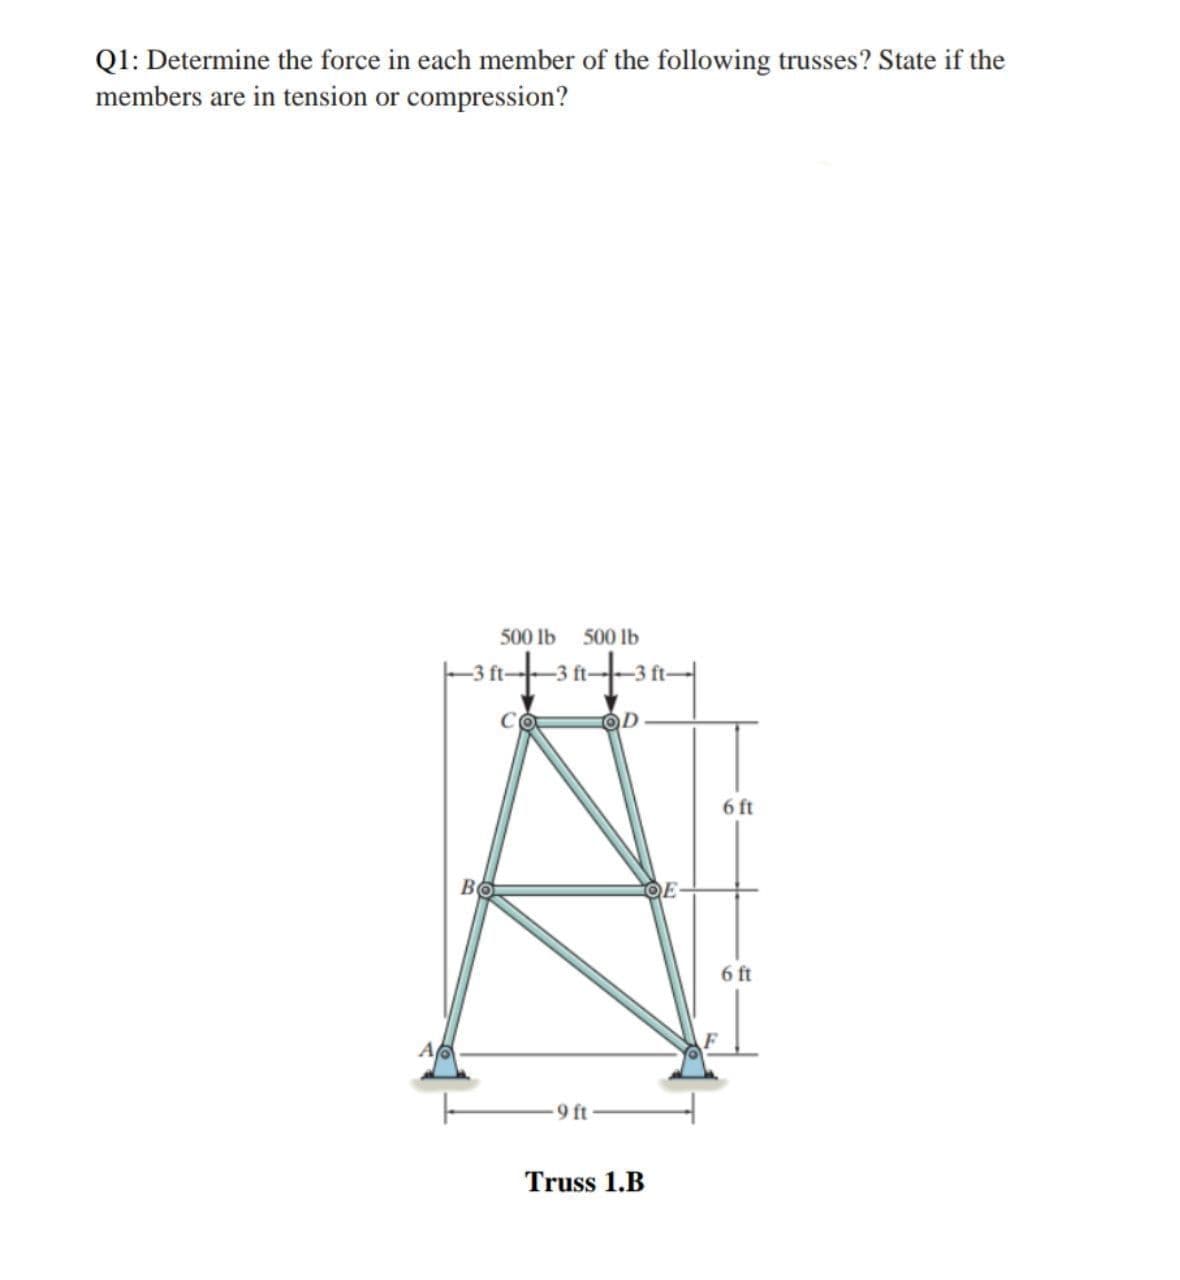 Q1: Determine the force in each member of the following trusses? State if the
members are in tension or compression?
500 lb
500 lb
-3 ft-
-3 ft-
6 ft
6 ft
9 ft-
Truss 1.B
